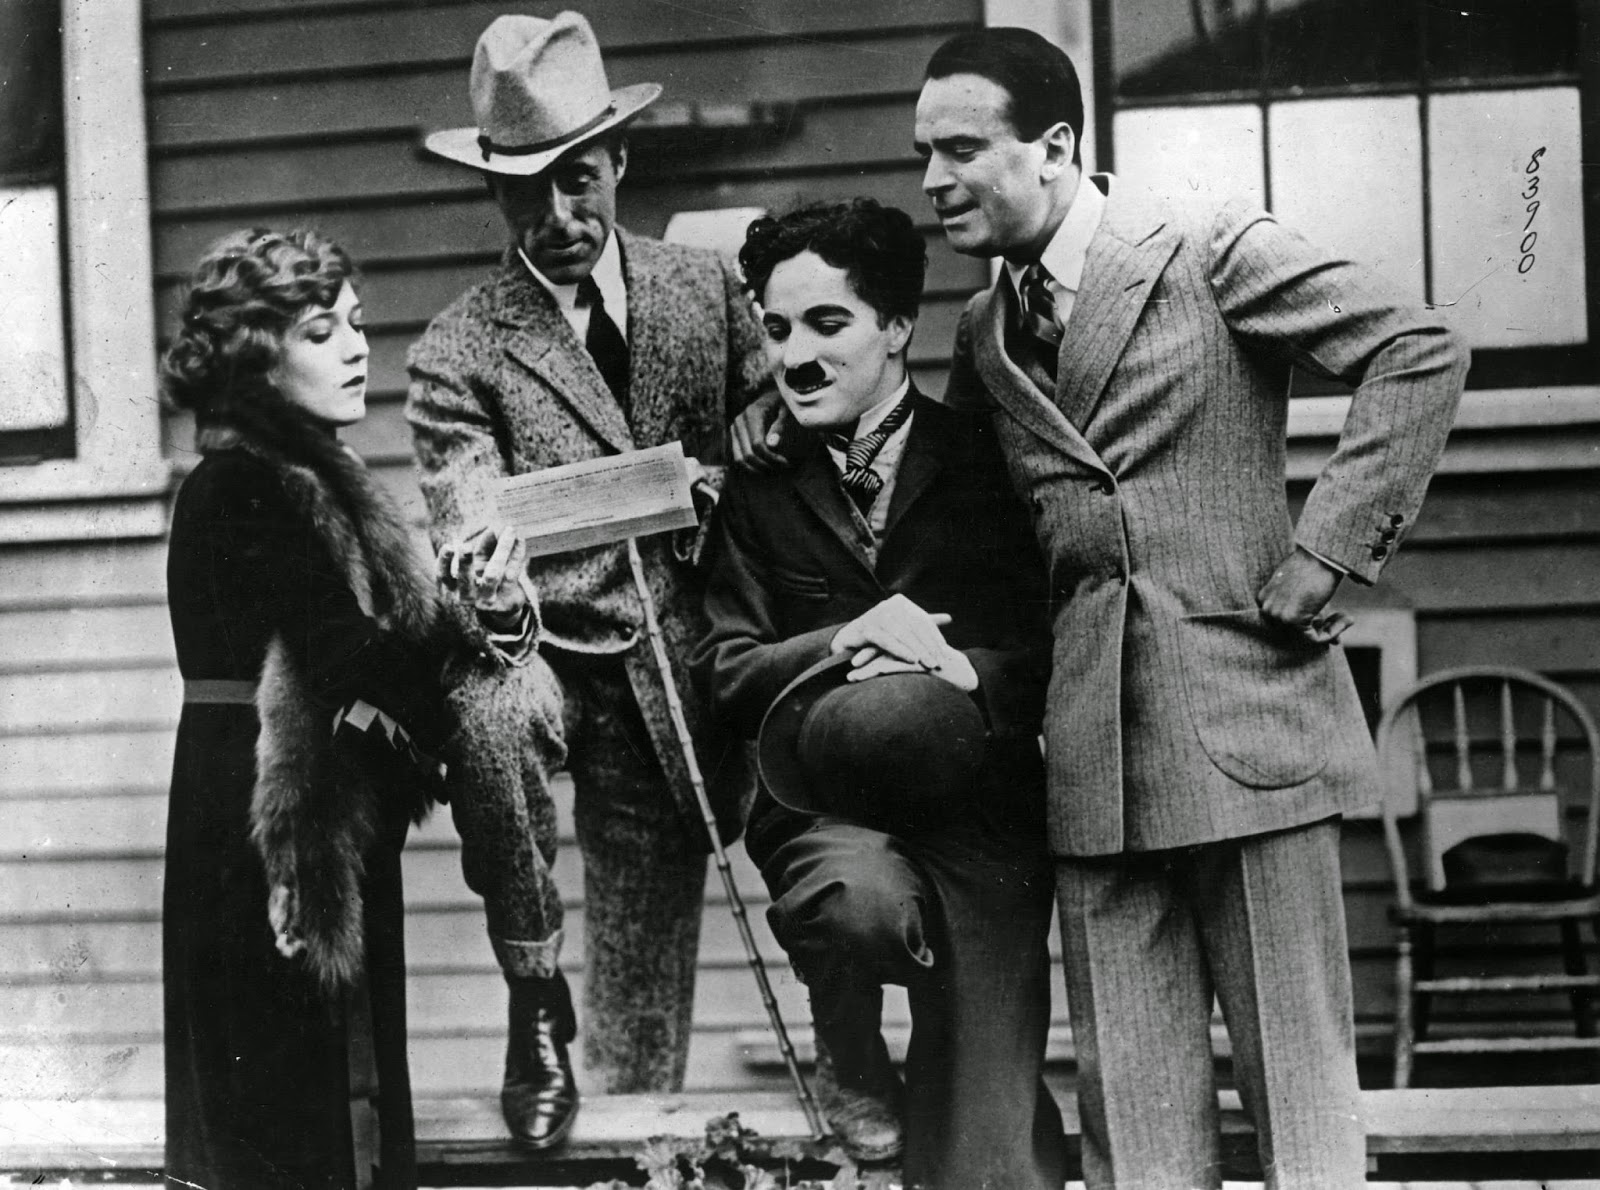 Amazing Historical Photo of Charlie Chaplin in 1919 